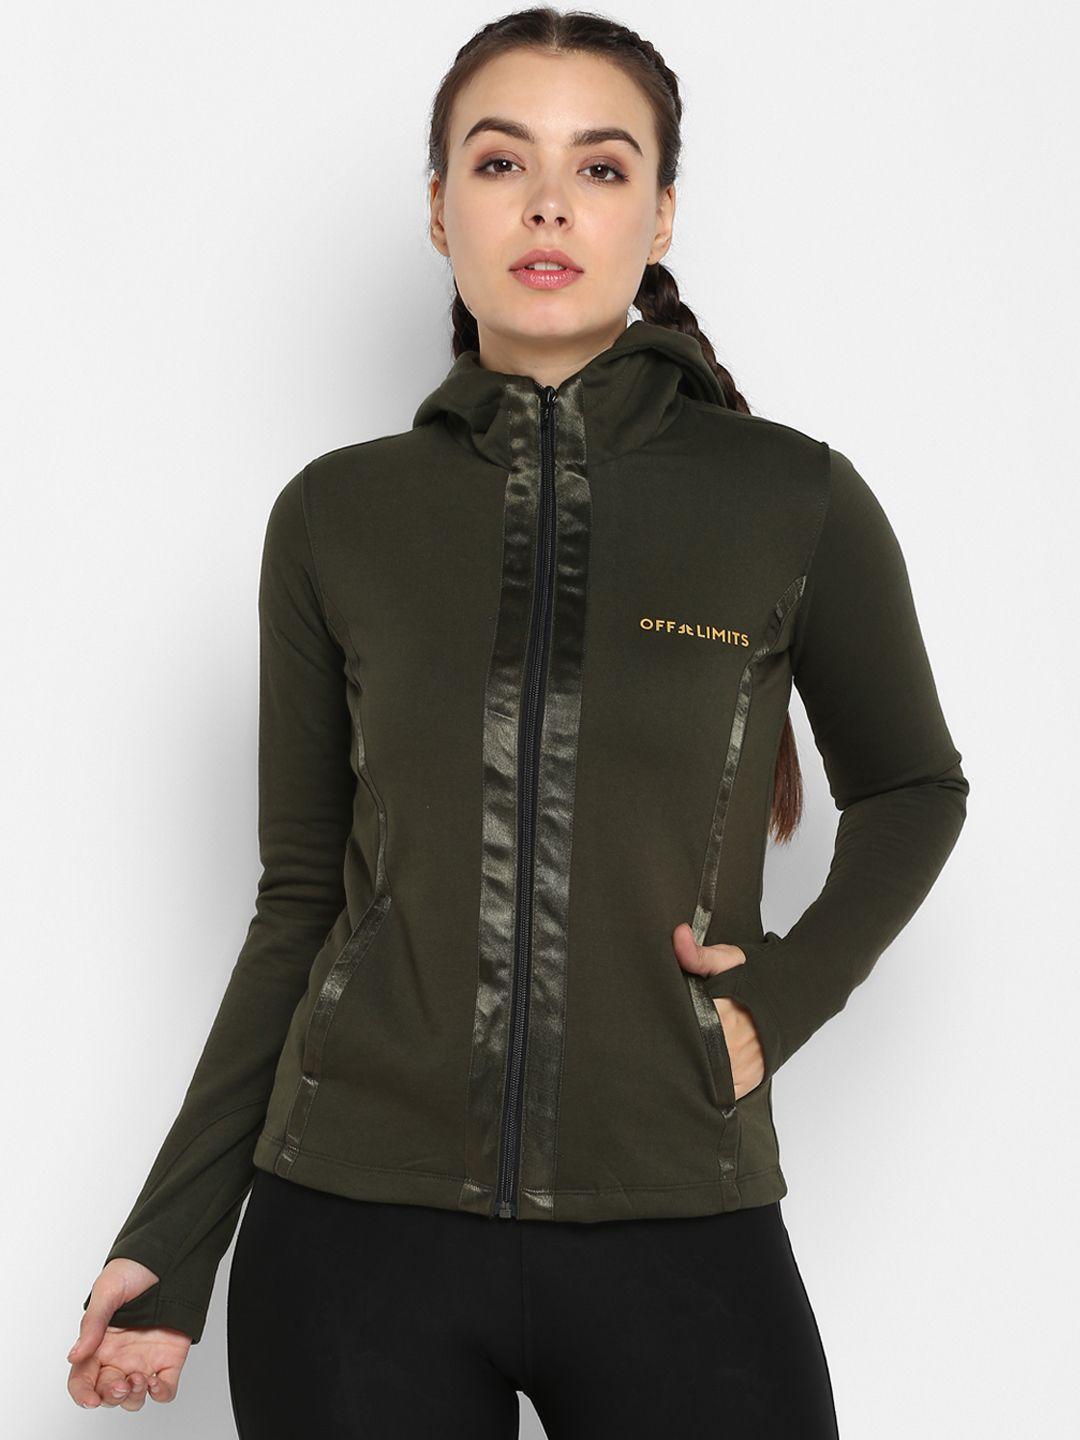 off-limits-women-olive-green-solid-sporty-jacket